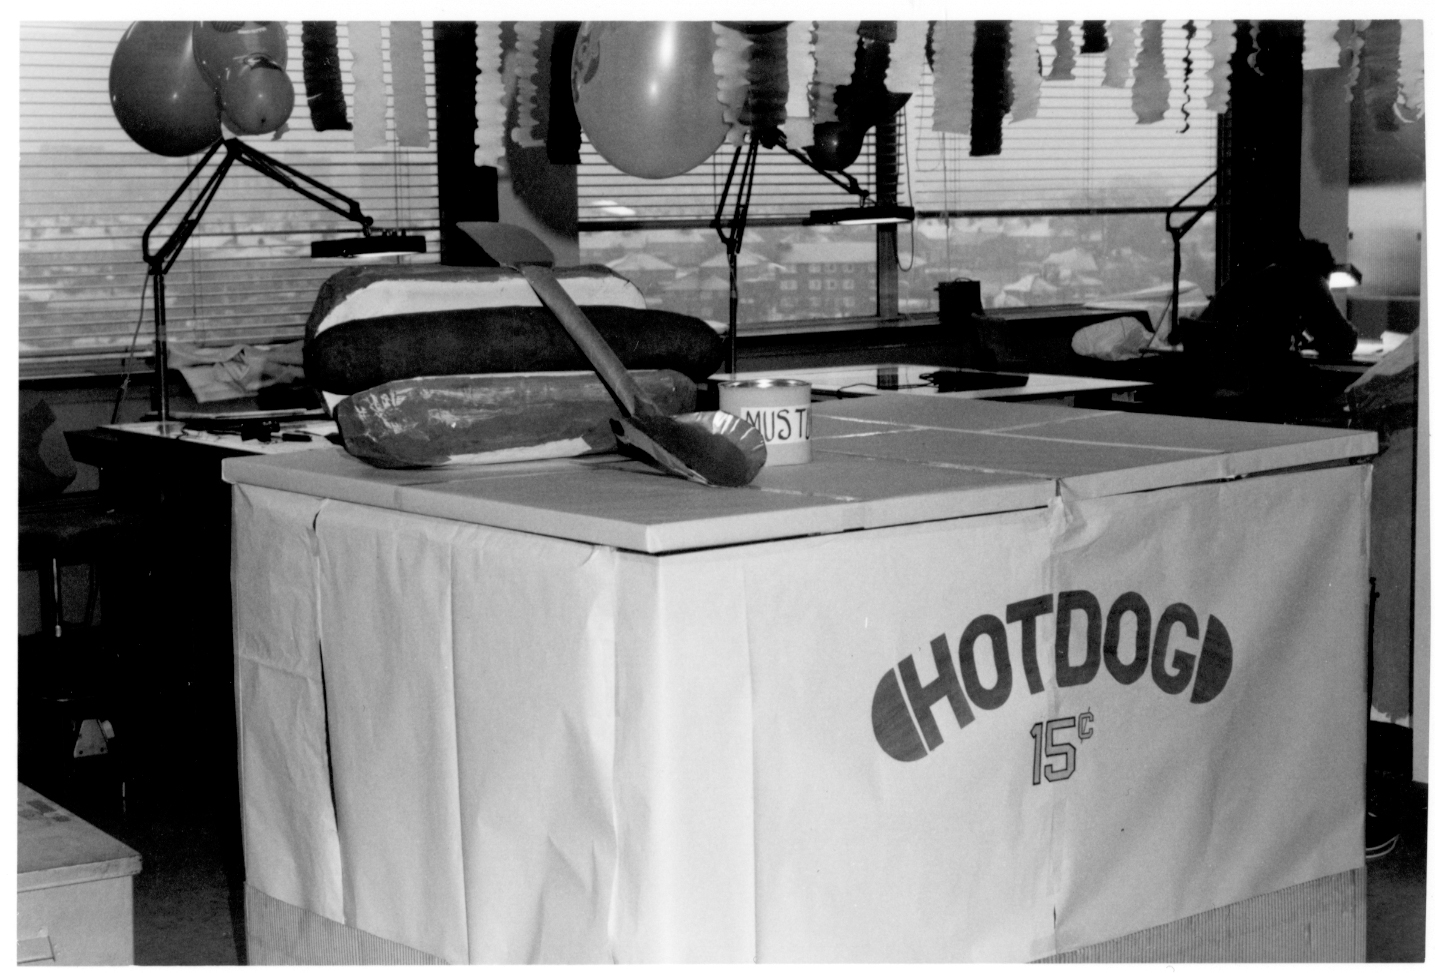 Hot dog stand